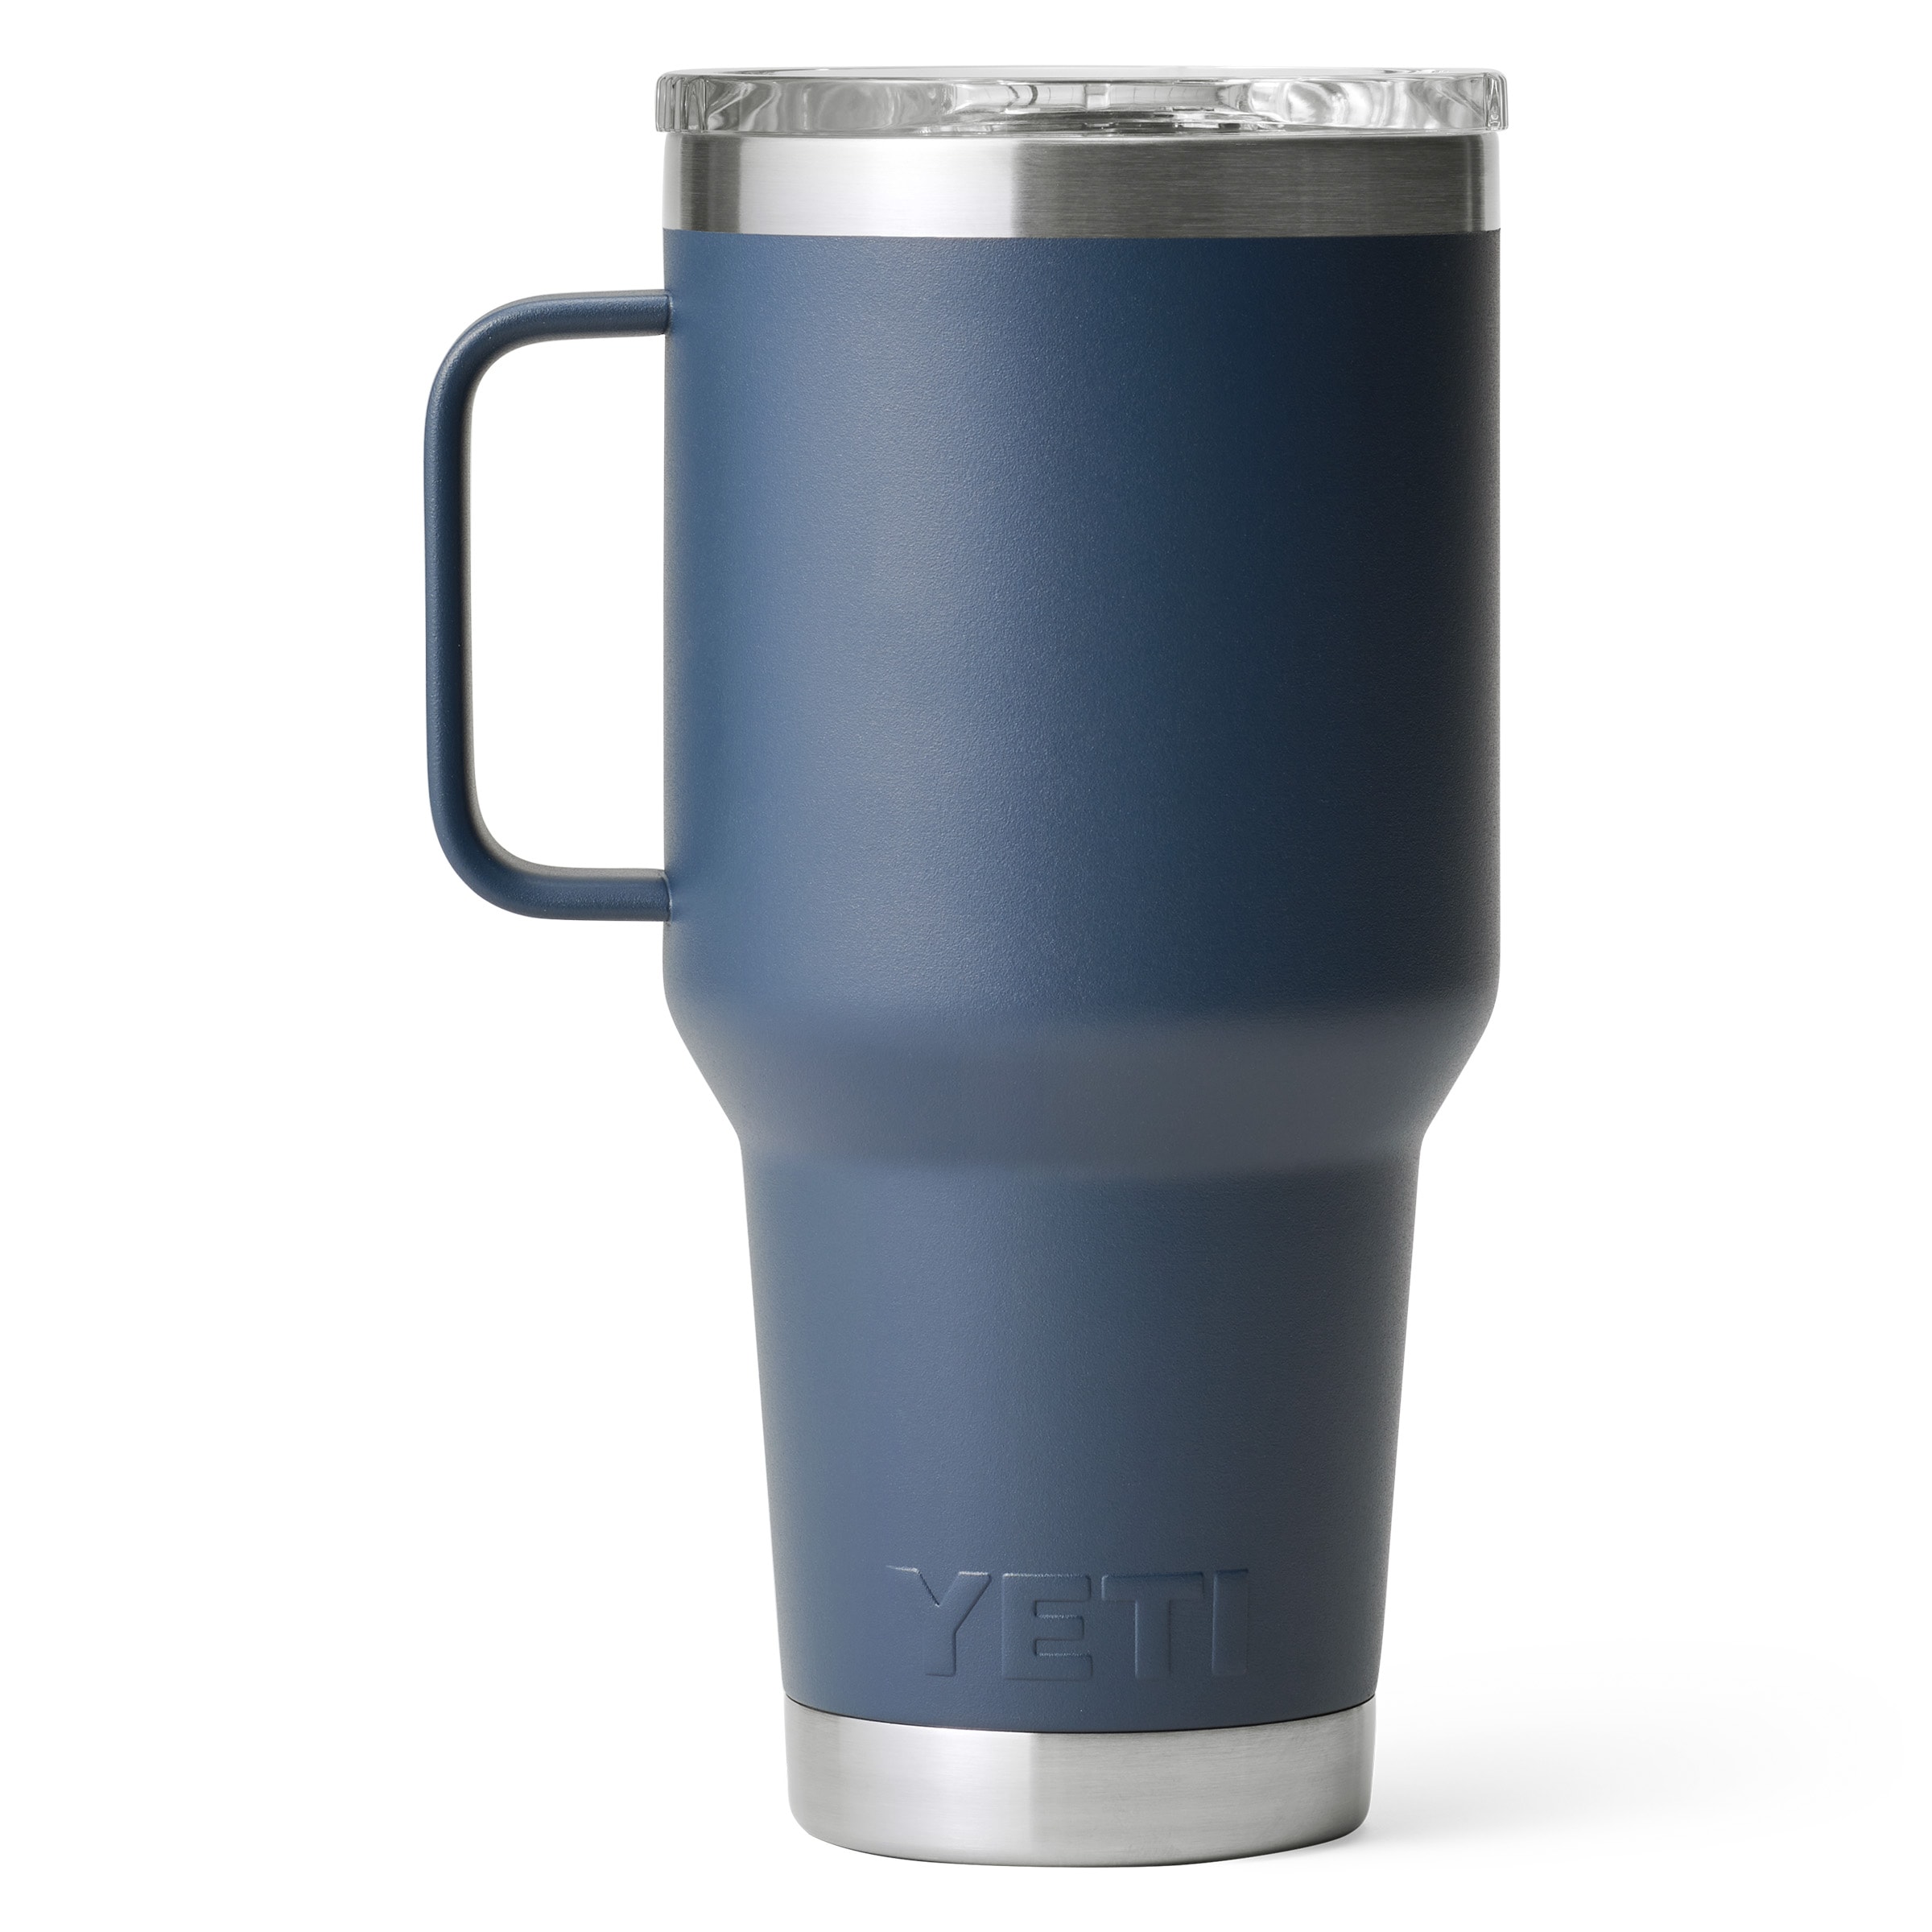 Best Stainless Small Coffee Mug for Travelers - Review Yeti 12oz